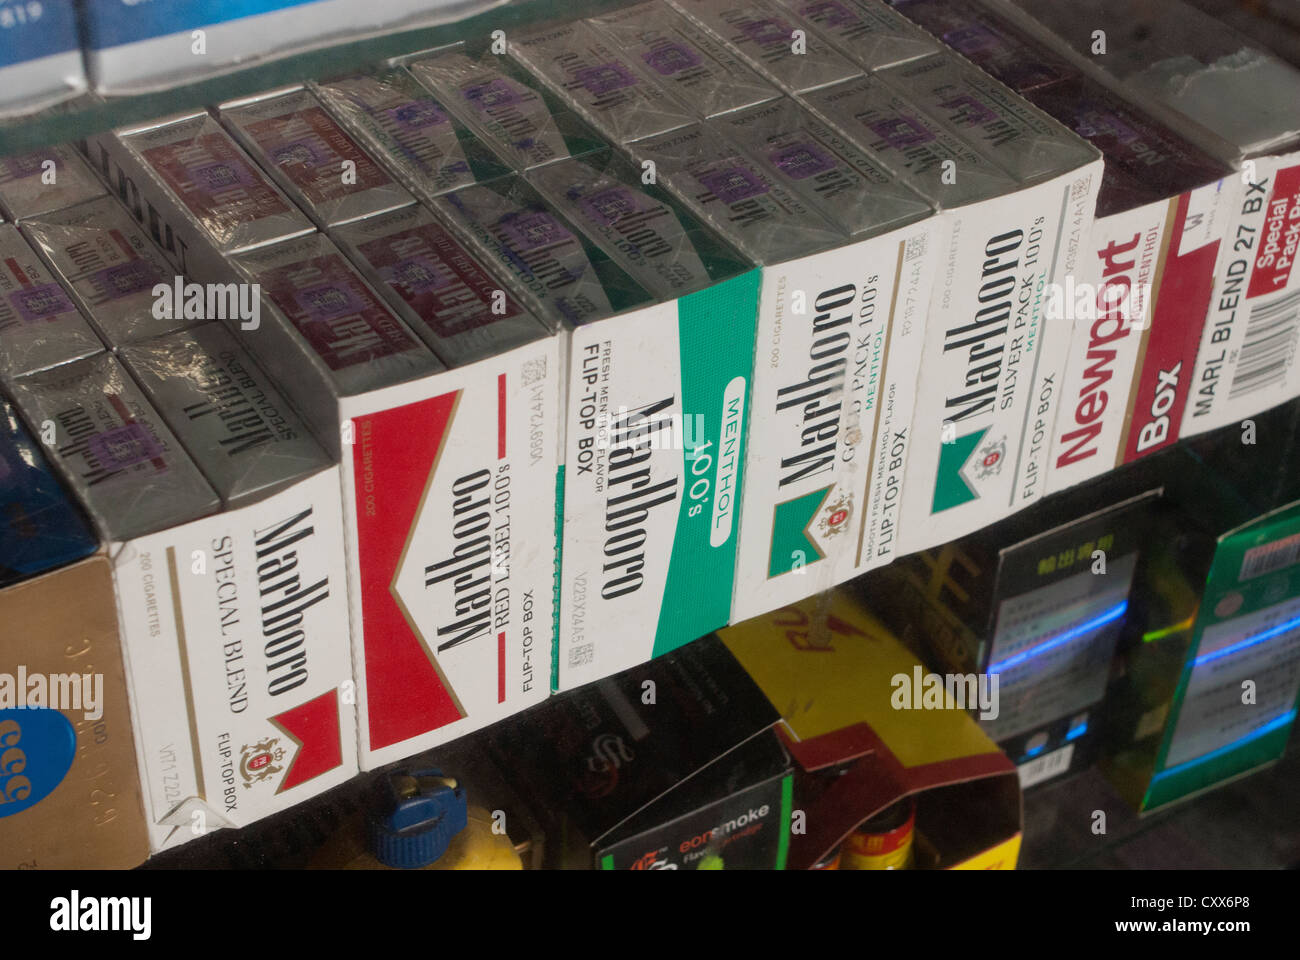 Cartons of cigarettes in the window of a grocery store in New York on Sunday, October 14, 2012. (© Richard B. Levine) Stock Photo